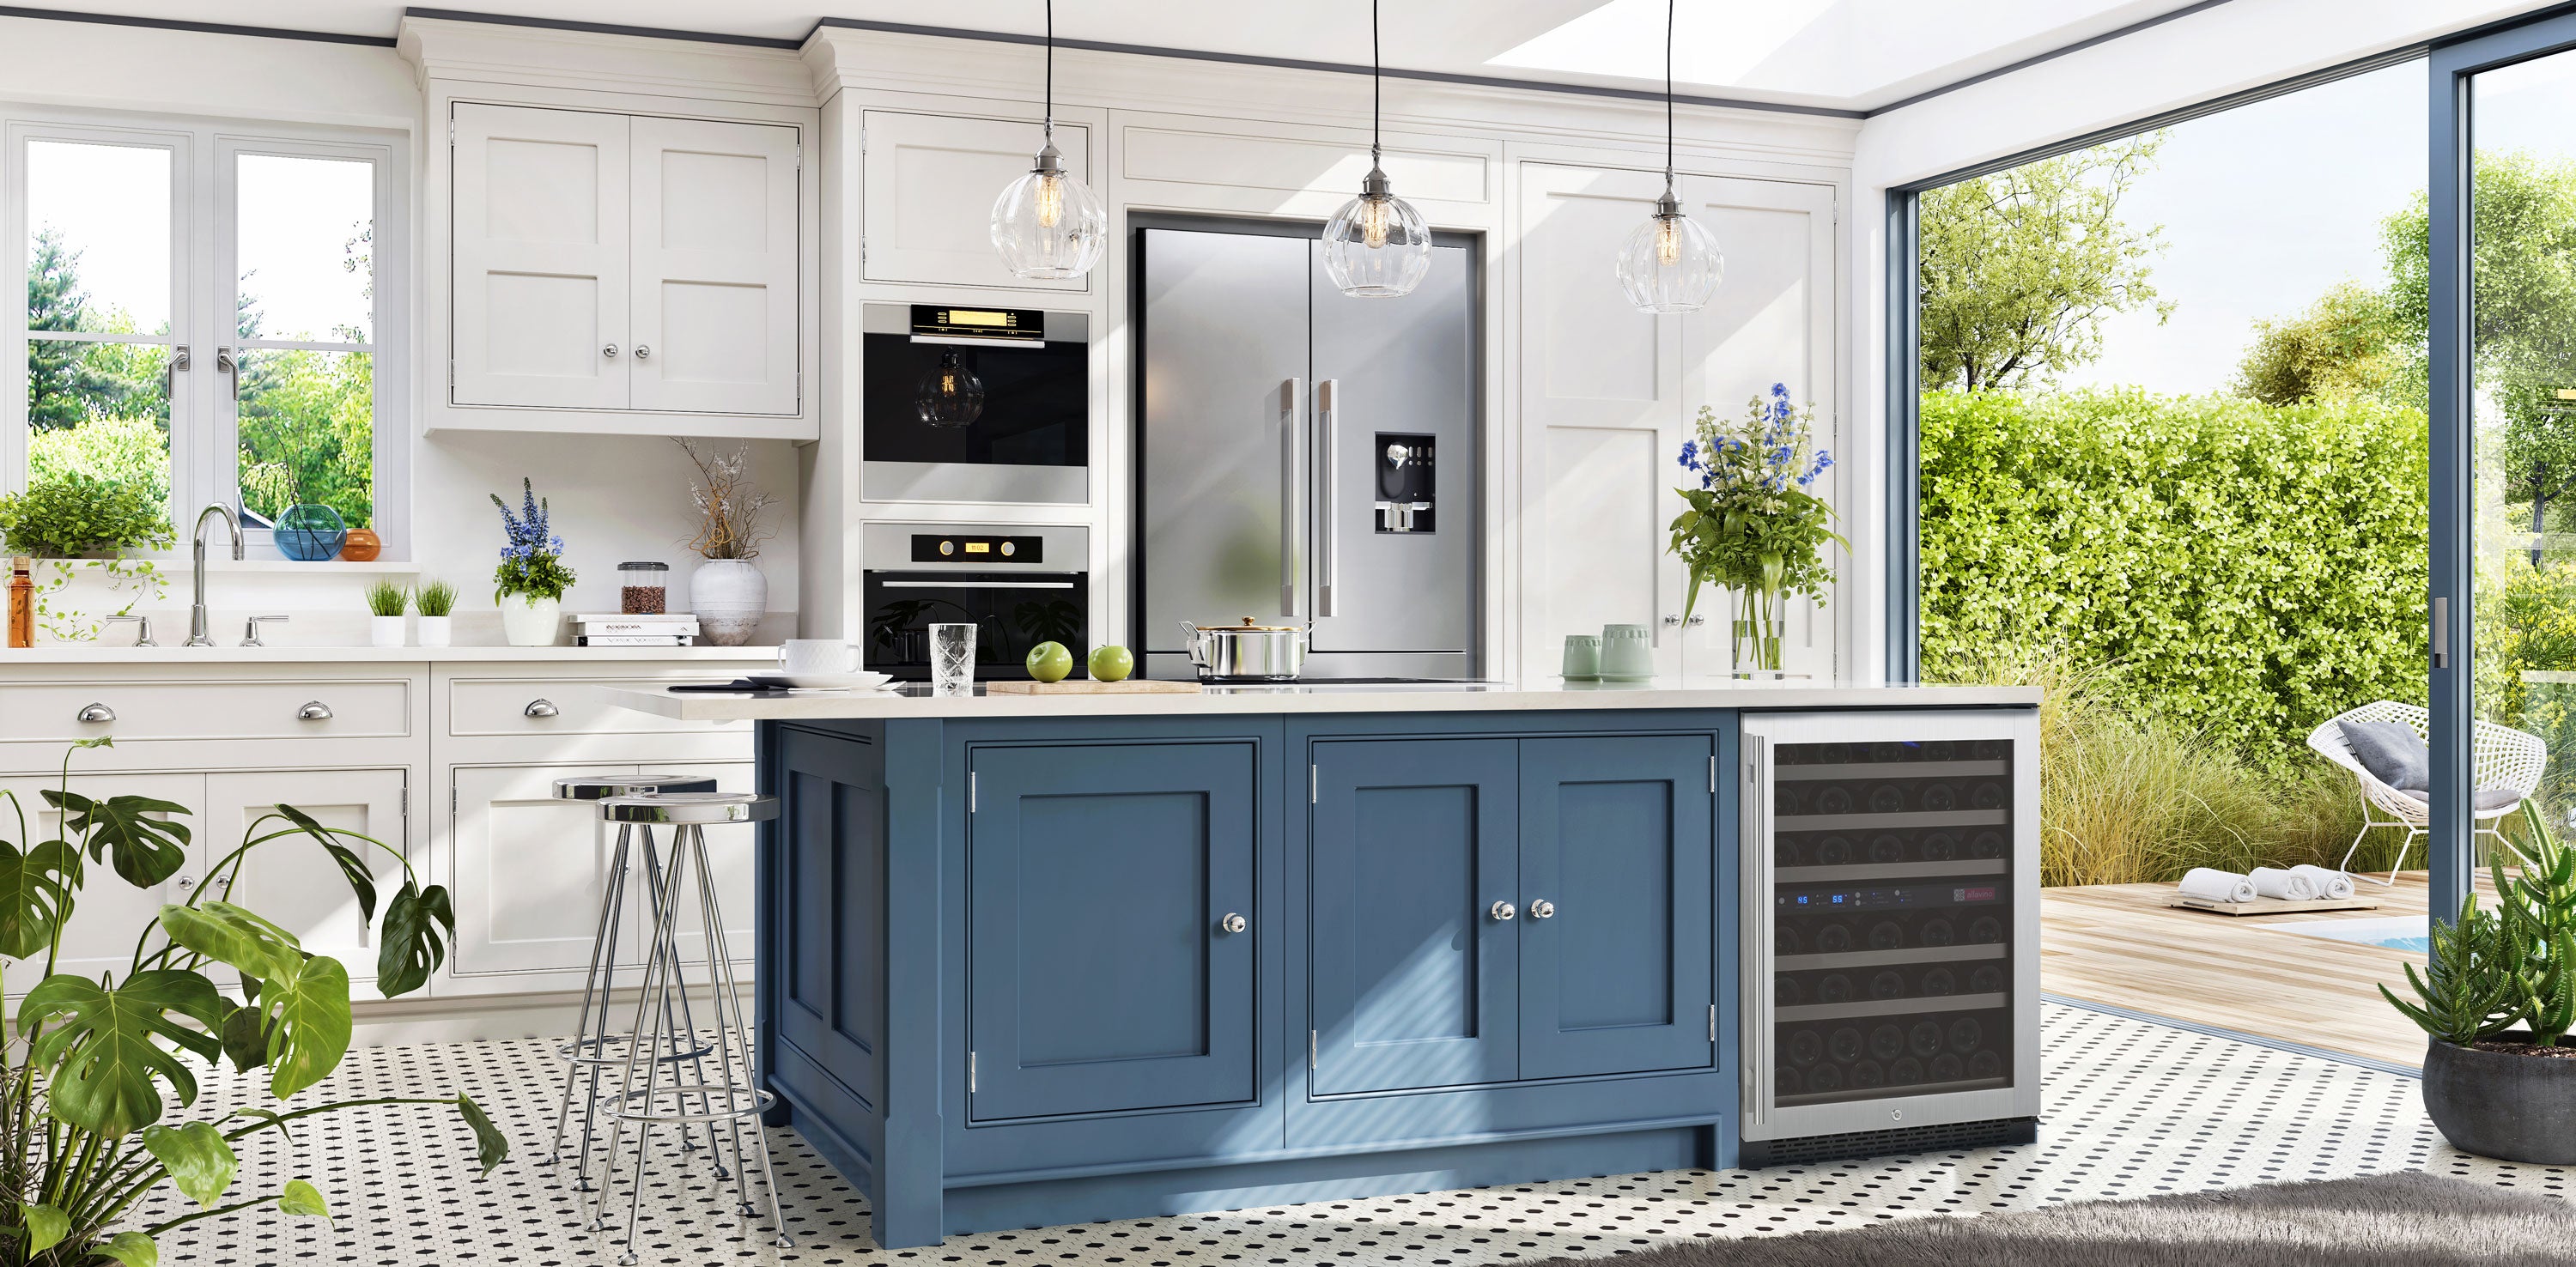 A beautiful, bright kitchen decorated with houseplants has a compact wine cooler built into the blue kitchen island